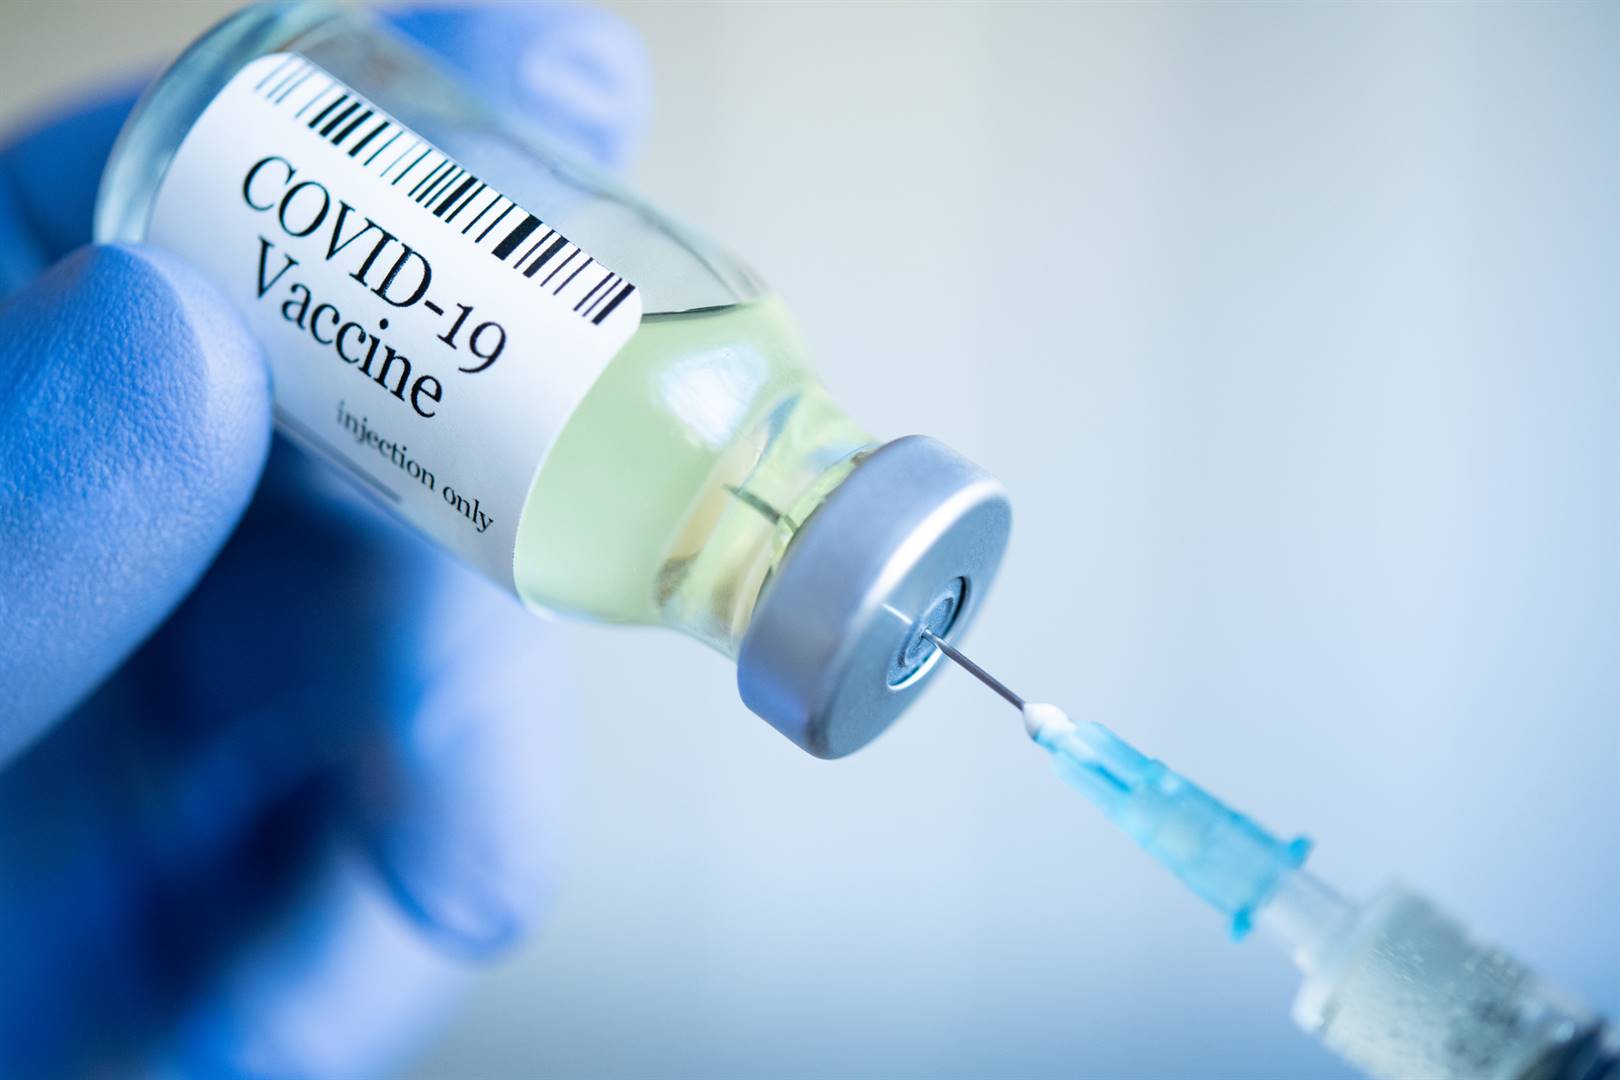 The writer asks if we have confidence in the South African government to make extremely important ethical decisions regarding mandatory Covid-19 vaccines on our behalf . Photo: iStock